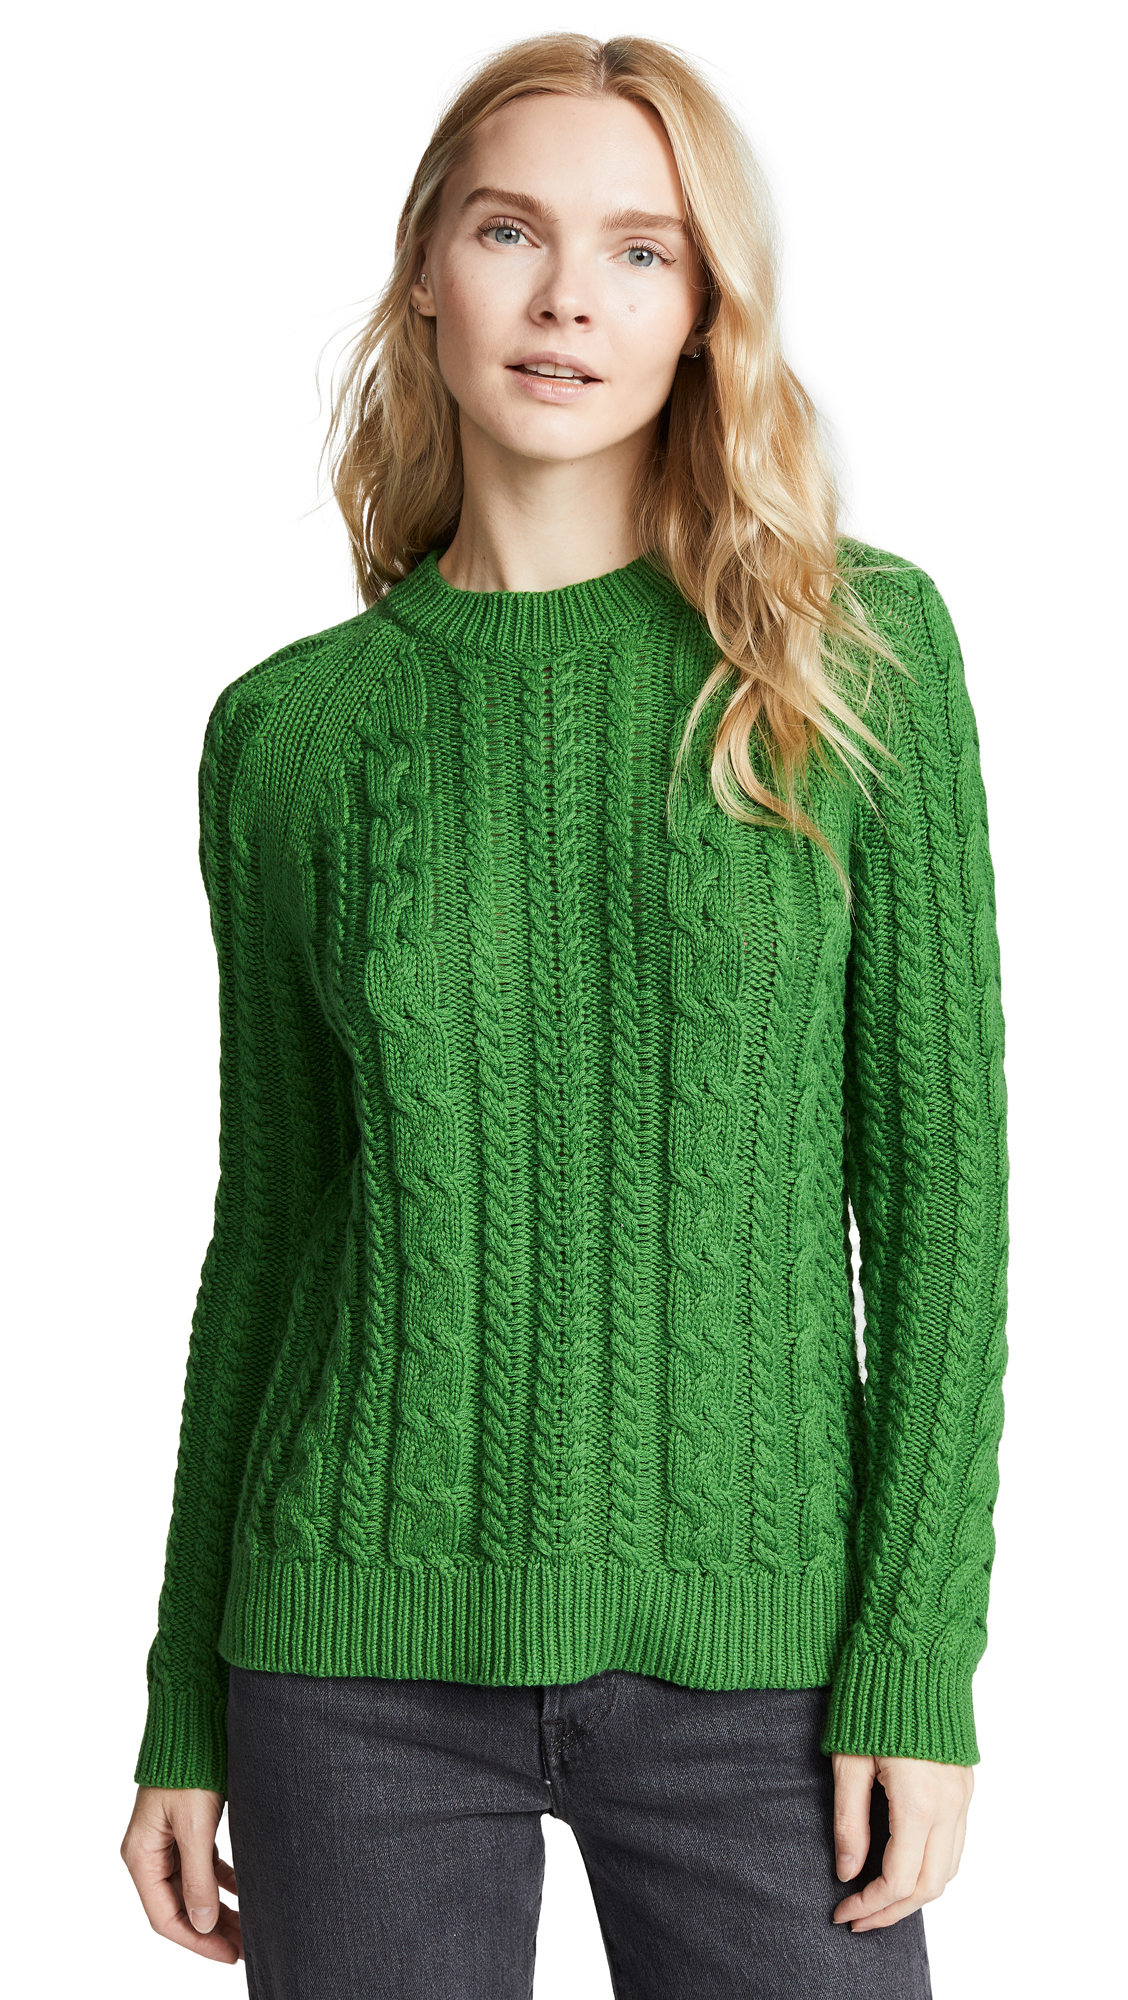 Bop Basics Boxy Cable Knit Sweater In Kelly Green | ModeSens